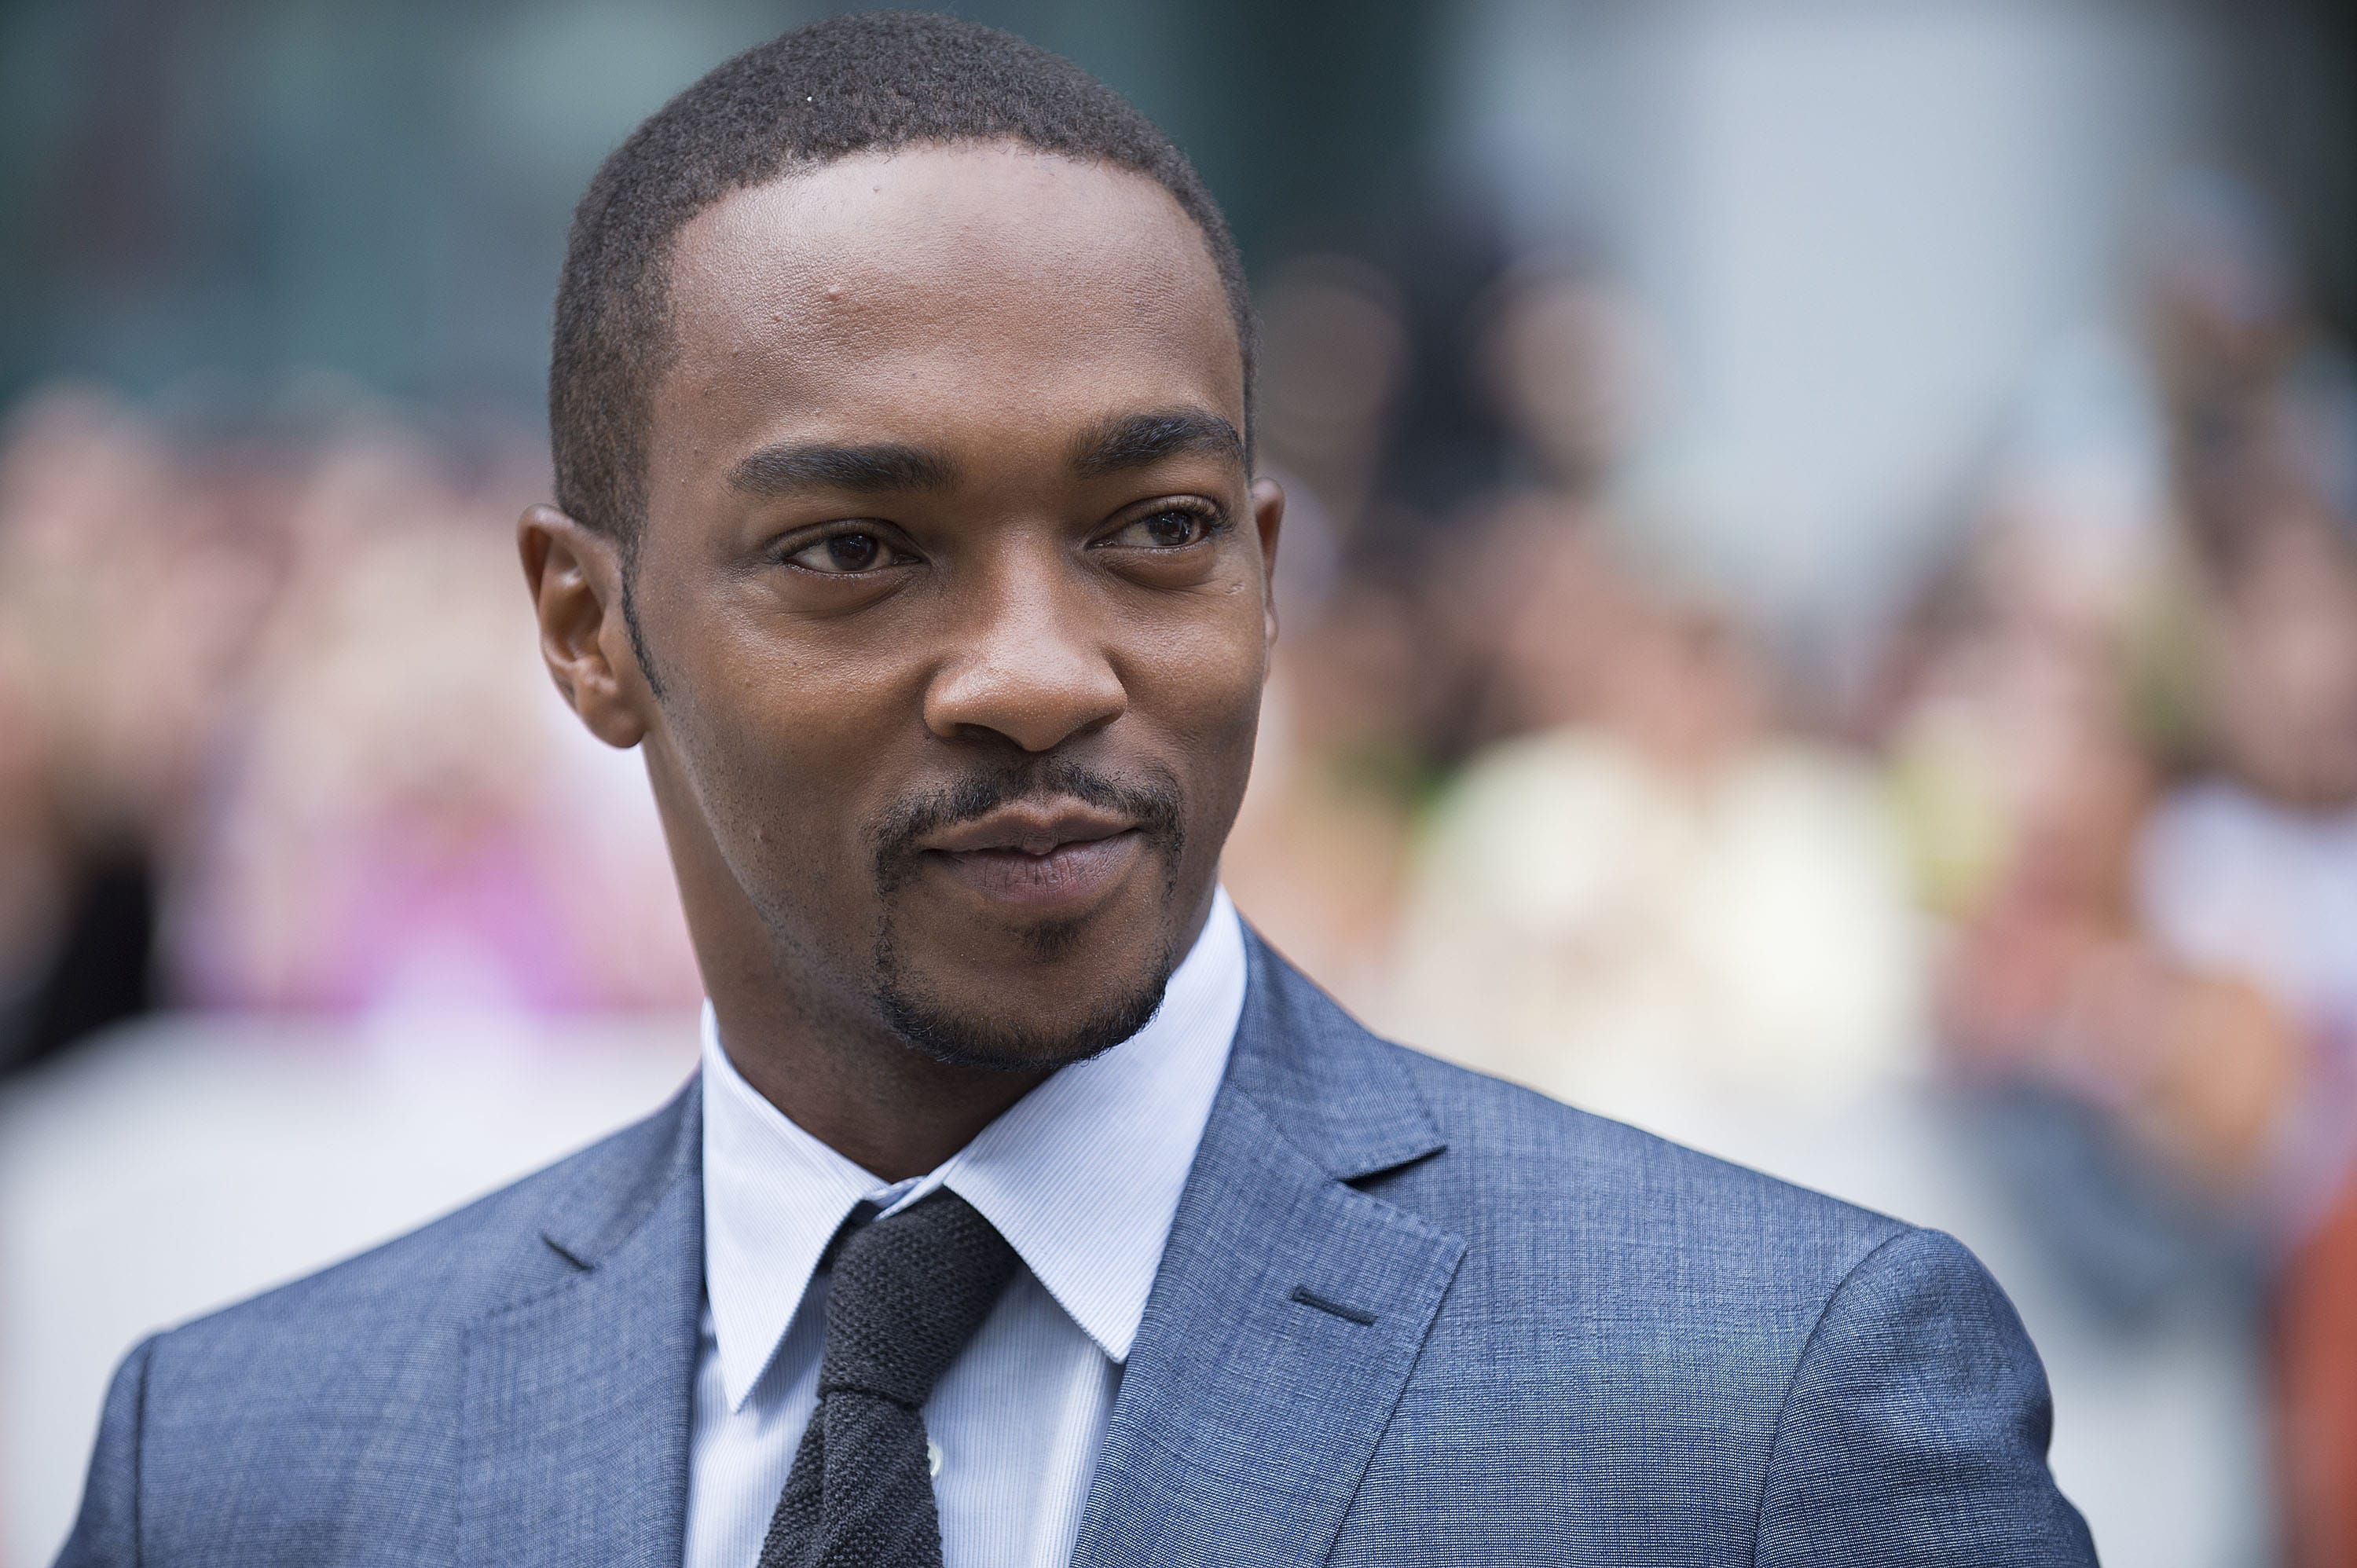 Anthony Mackie Wallpaper Background HD 57260 3000x1996px